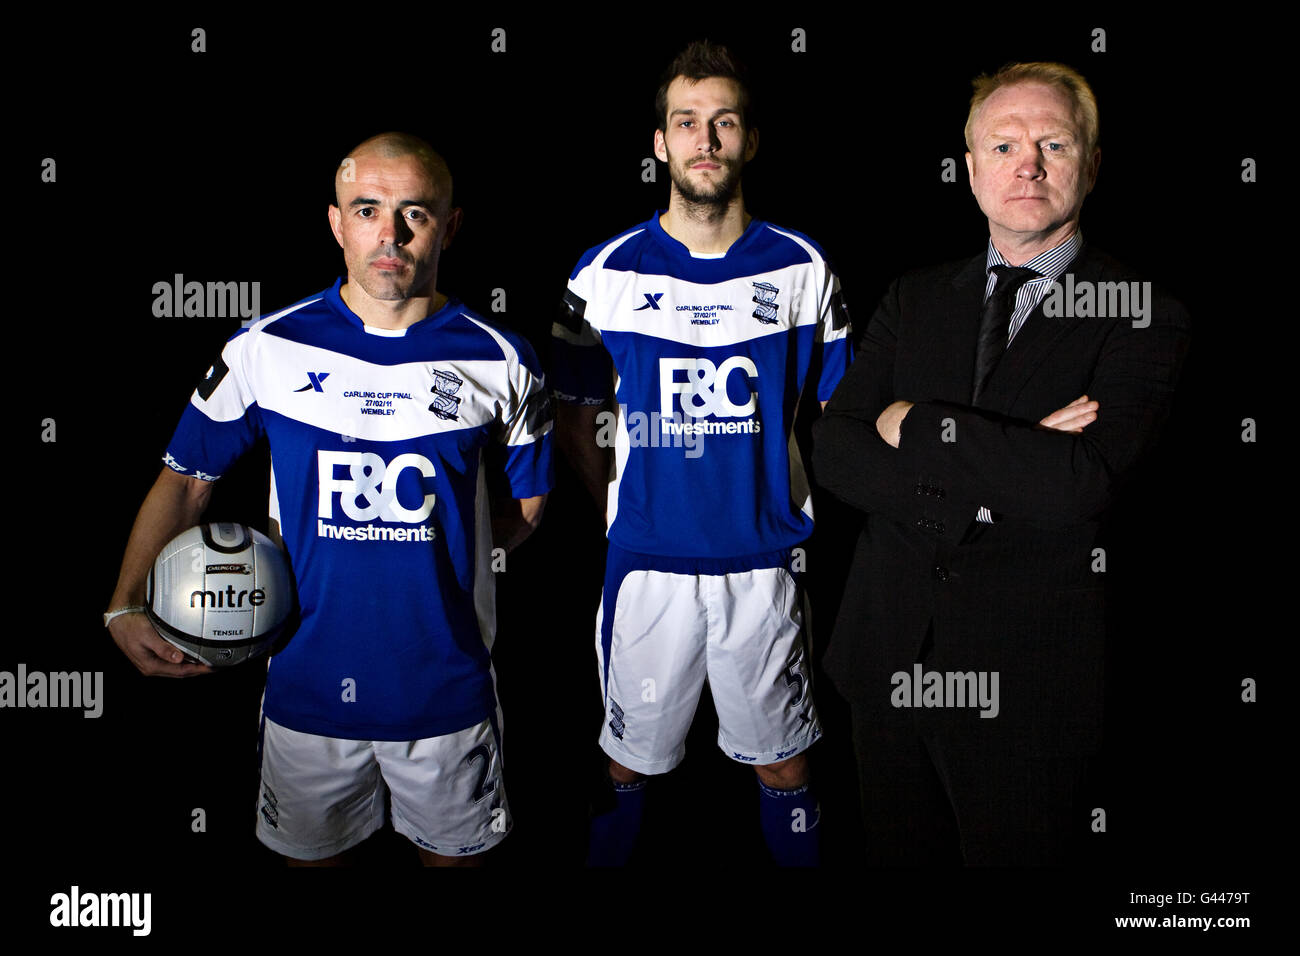 Soccer - Carling Cup Final Preview - Birmingham City Photocall. L-R: Birmingham City's Stephen Carr, Roger Johnson and manager Alex McLeish Stock Photo